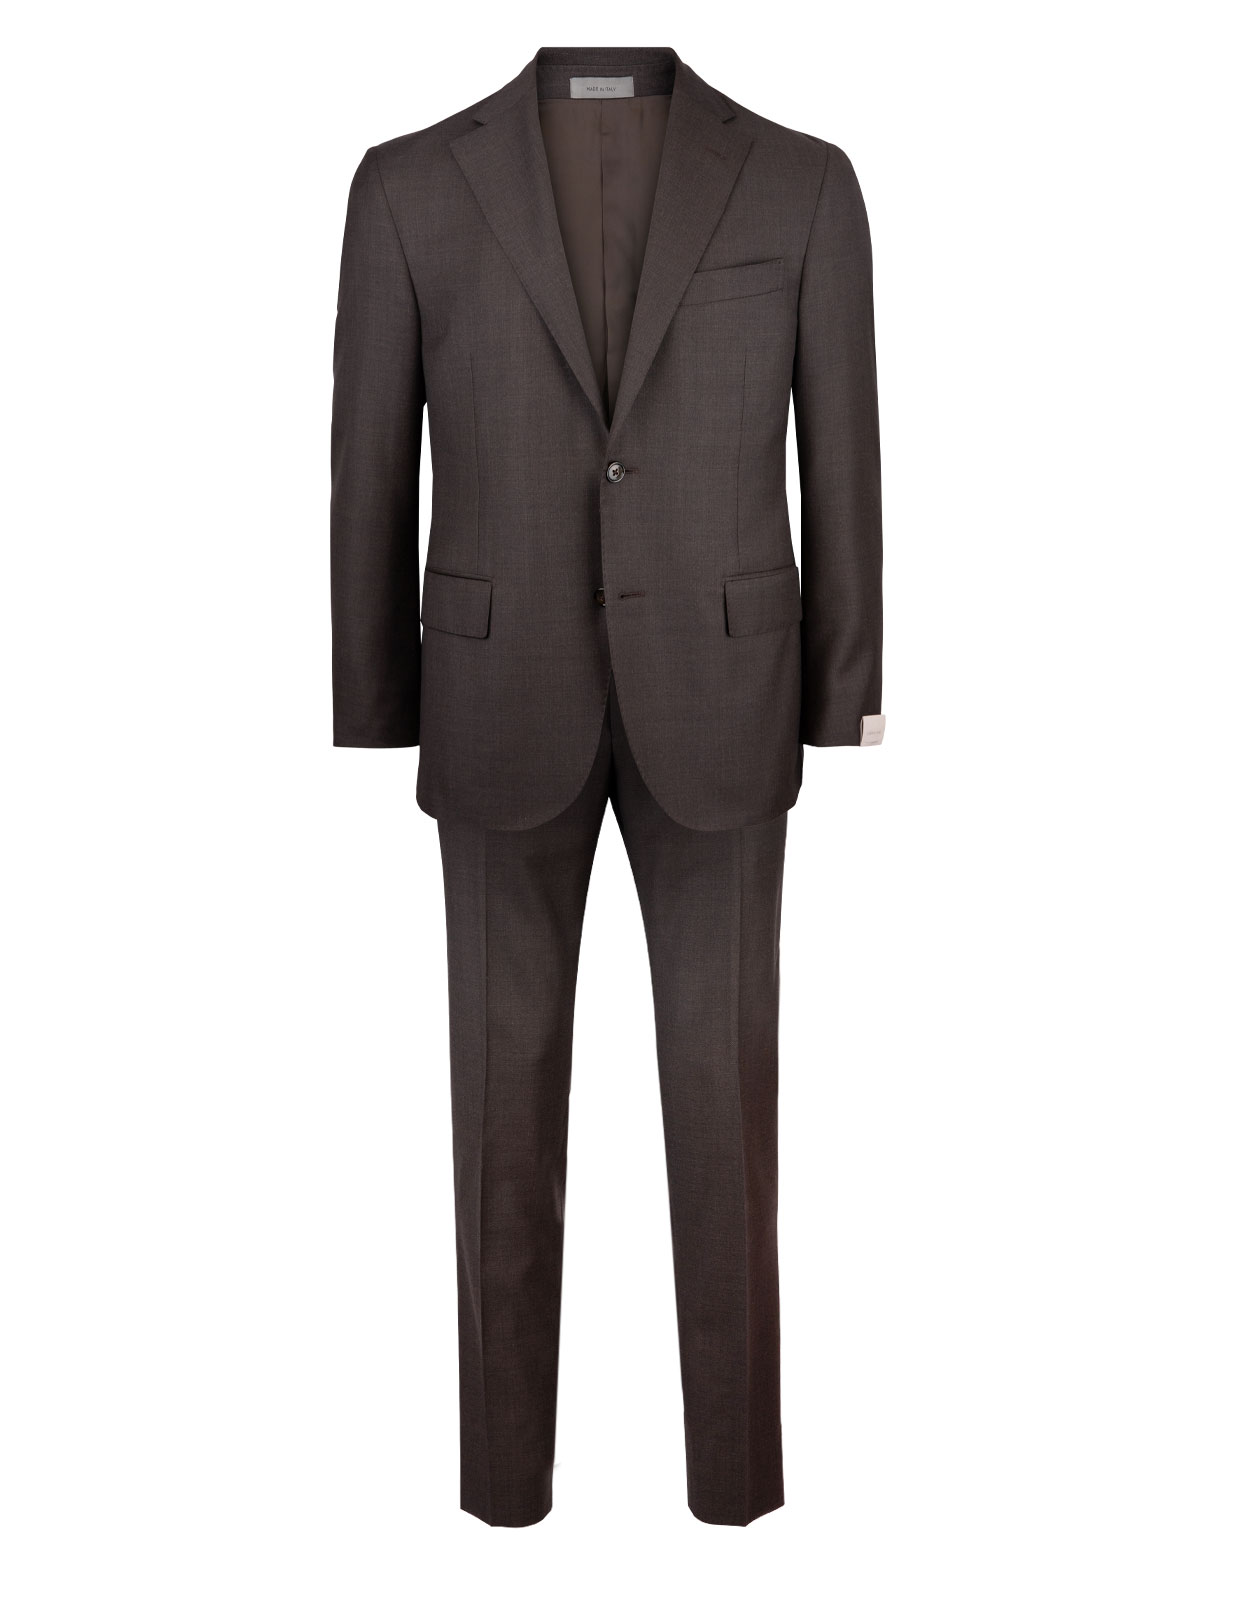 Academy Soft Suit 130's  Wool Brown Stl 48